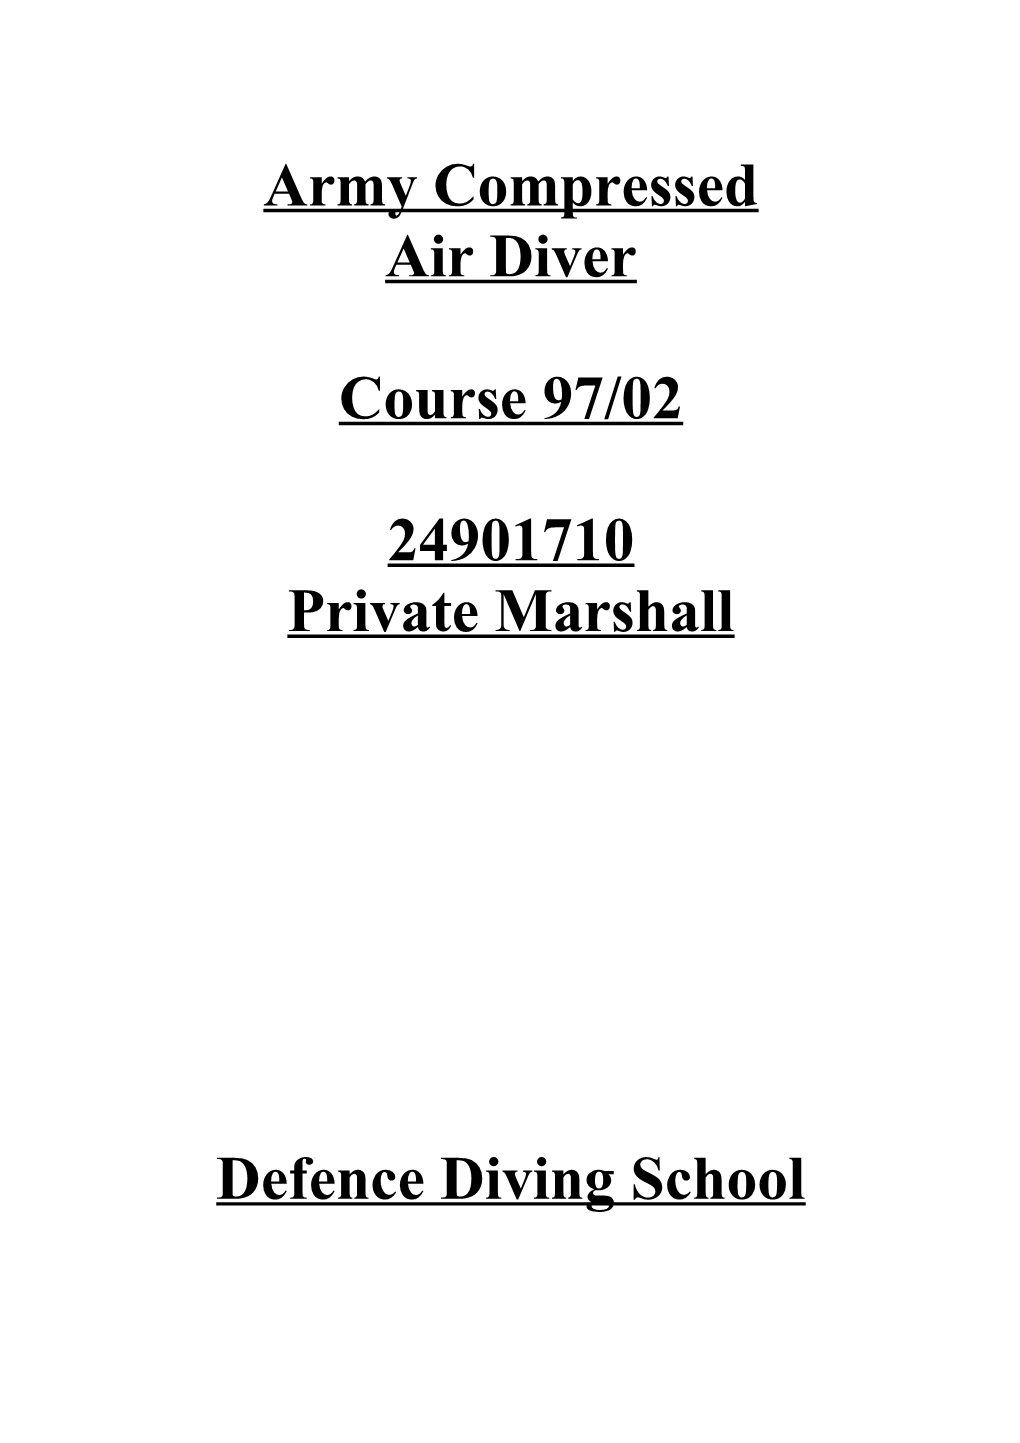 Army Compressed Air Diver